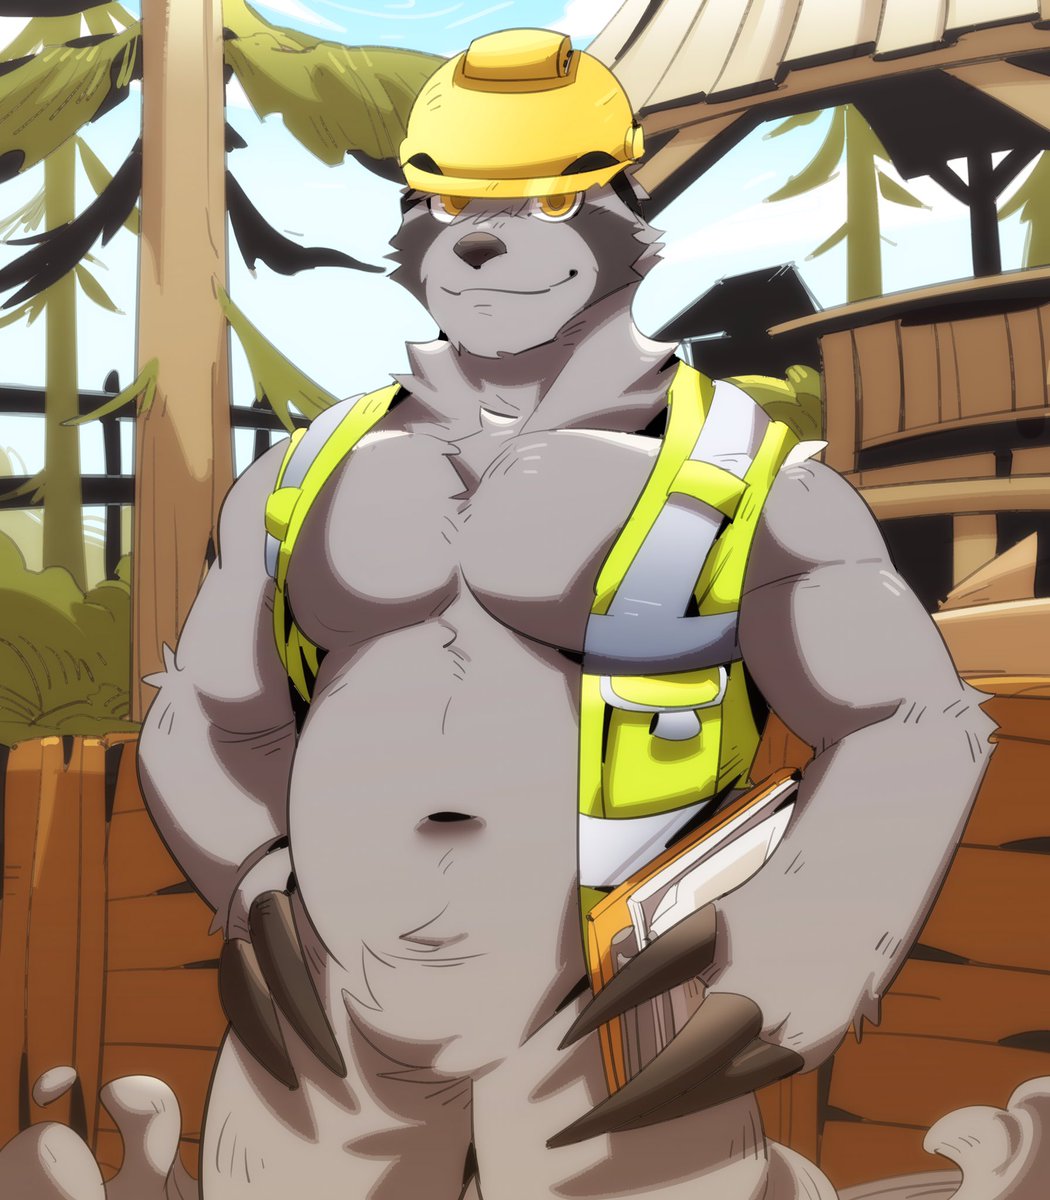 Commission done by @banksy5057
Naked worker’s vest makes his body more perky uwu